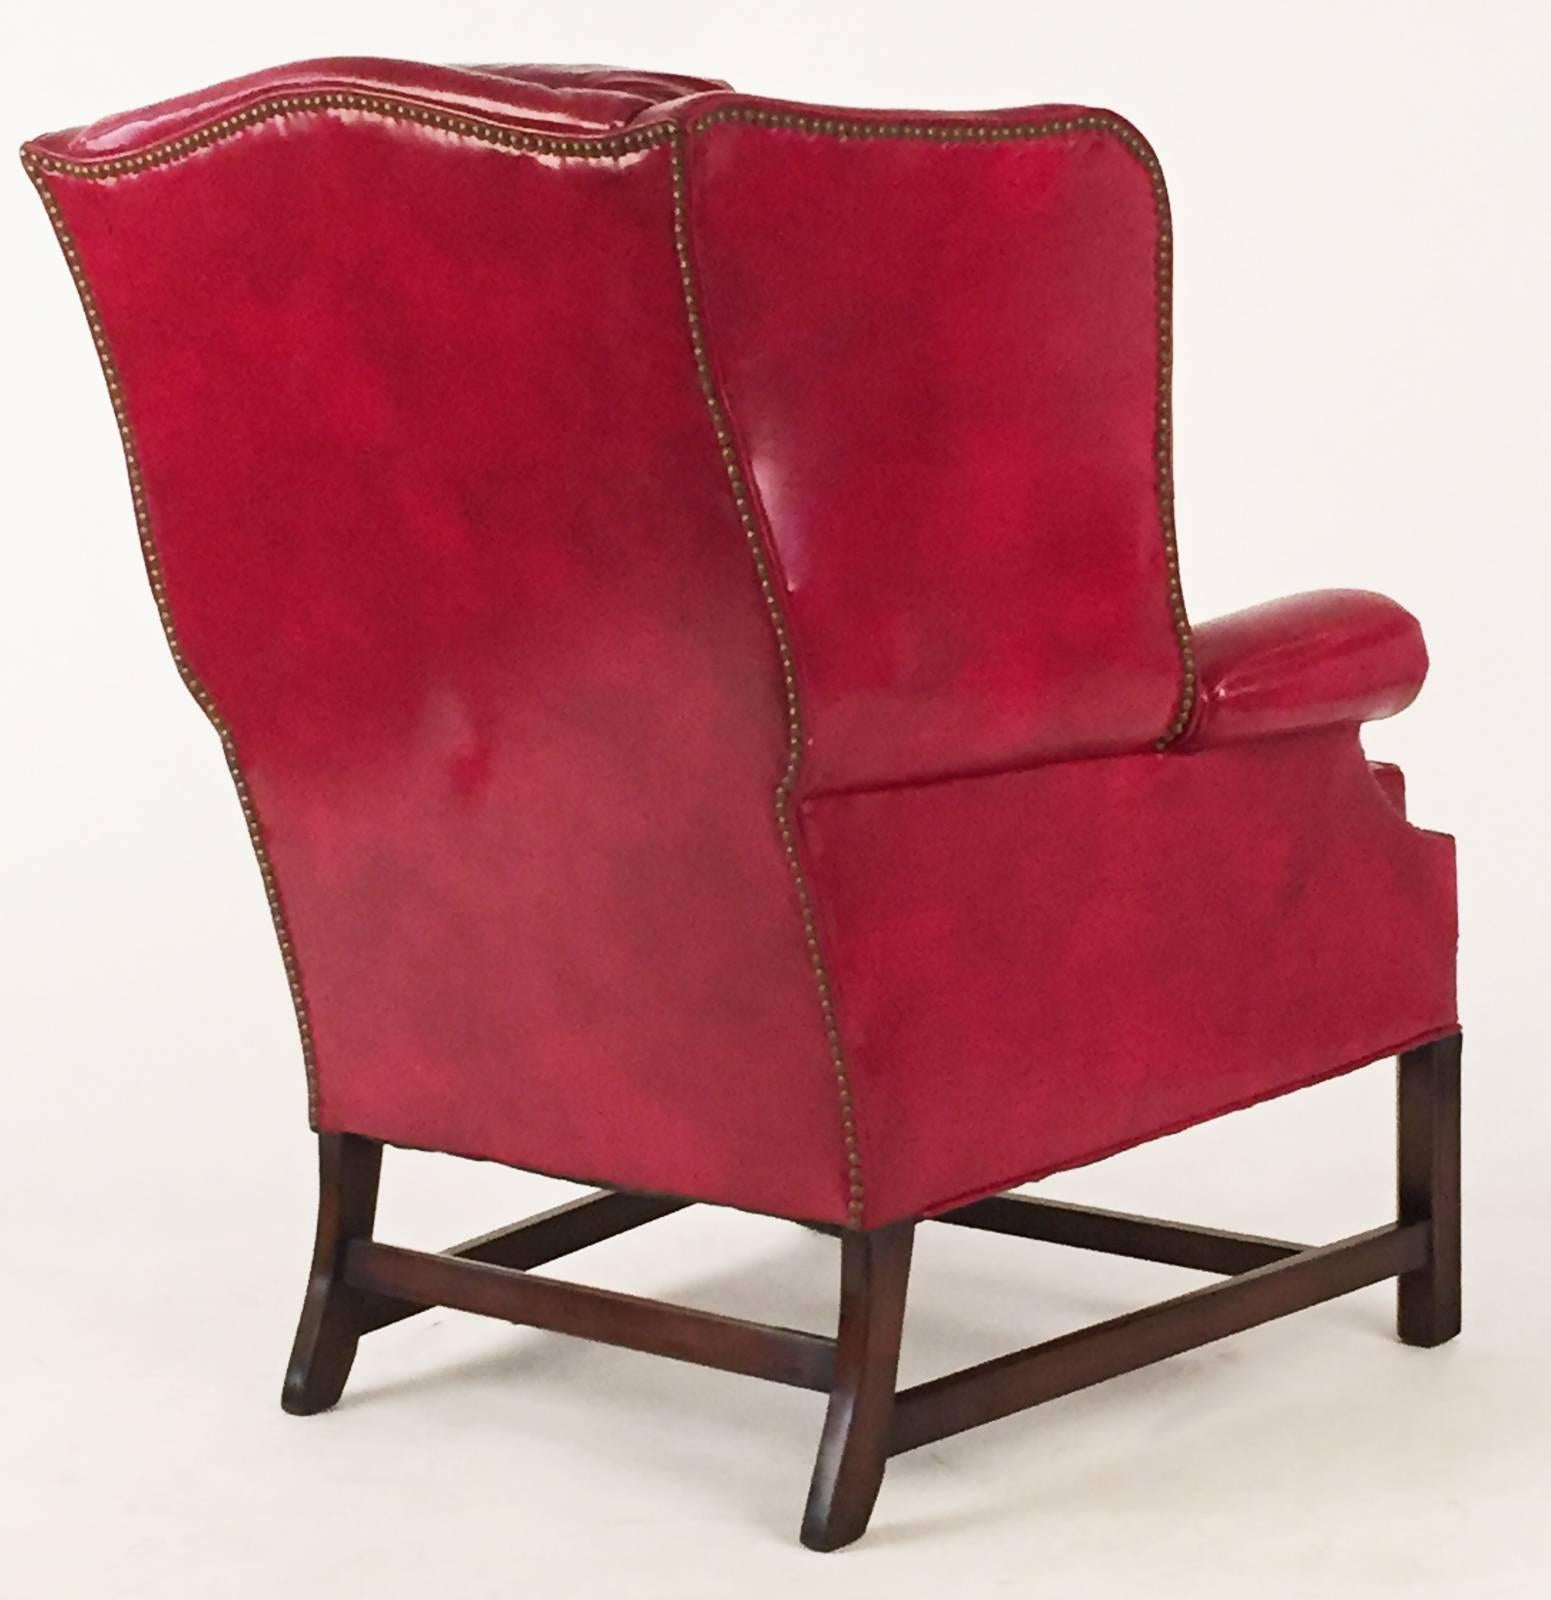 Mid-Century Modern Club Chairs Pair in Leather Upholstery